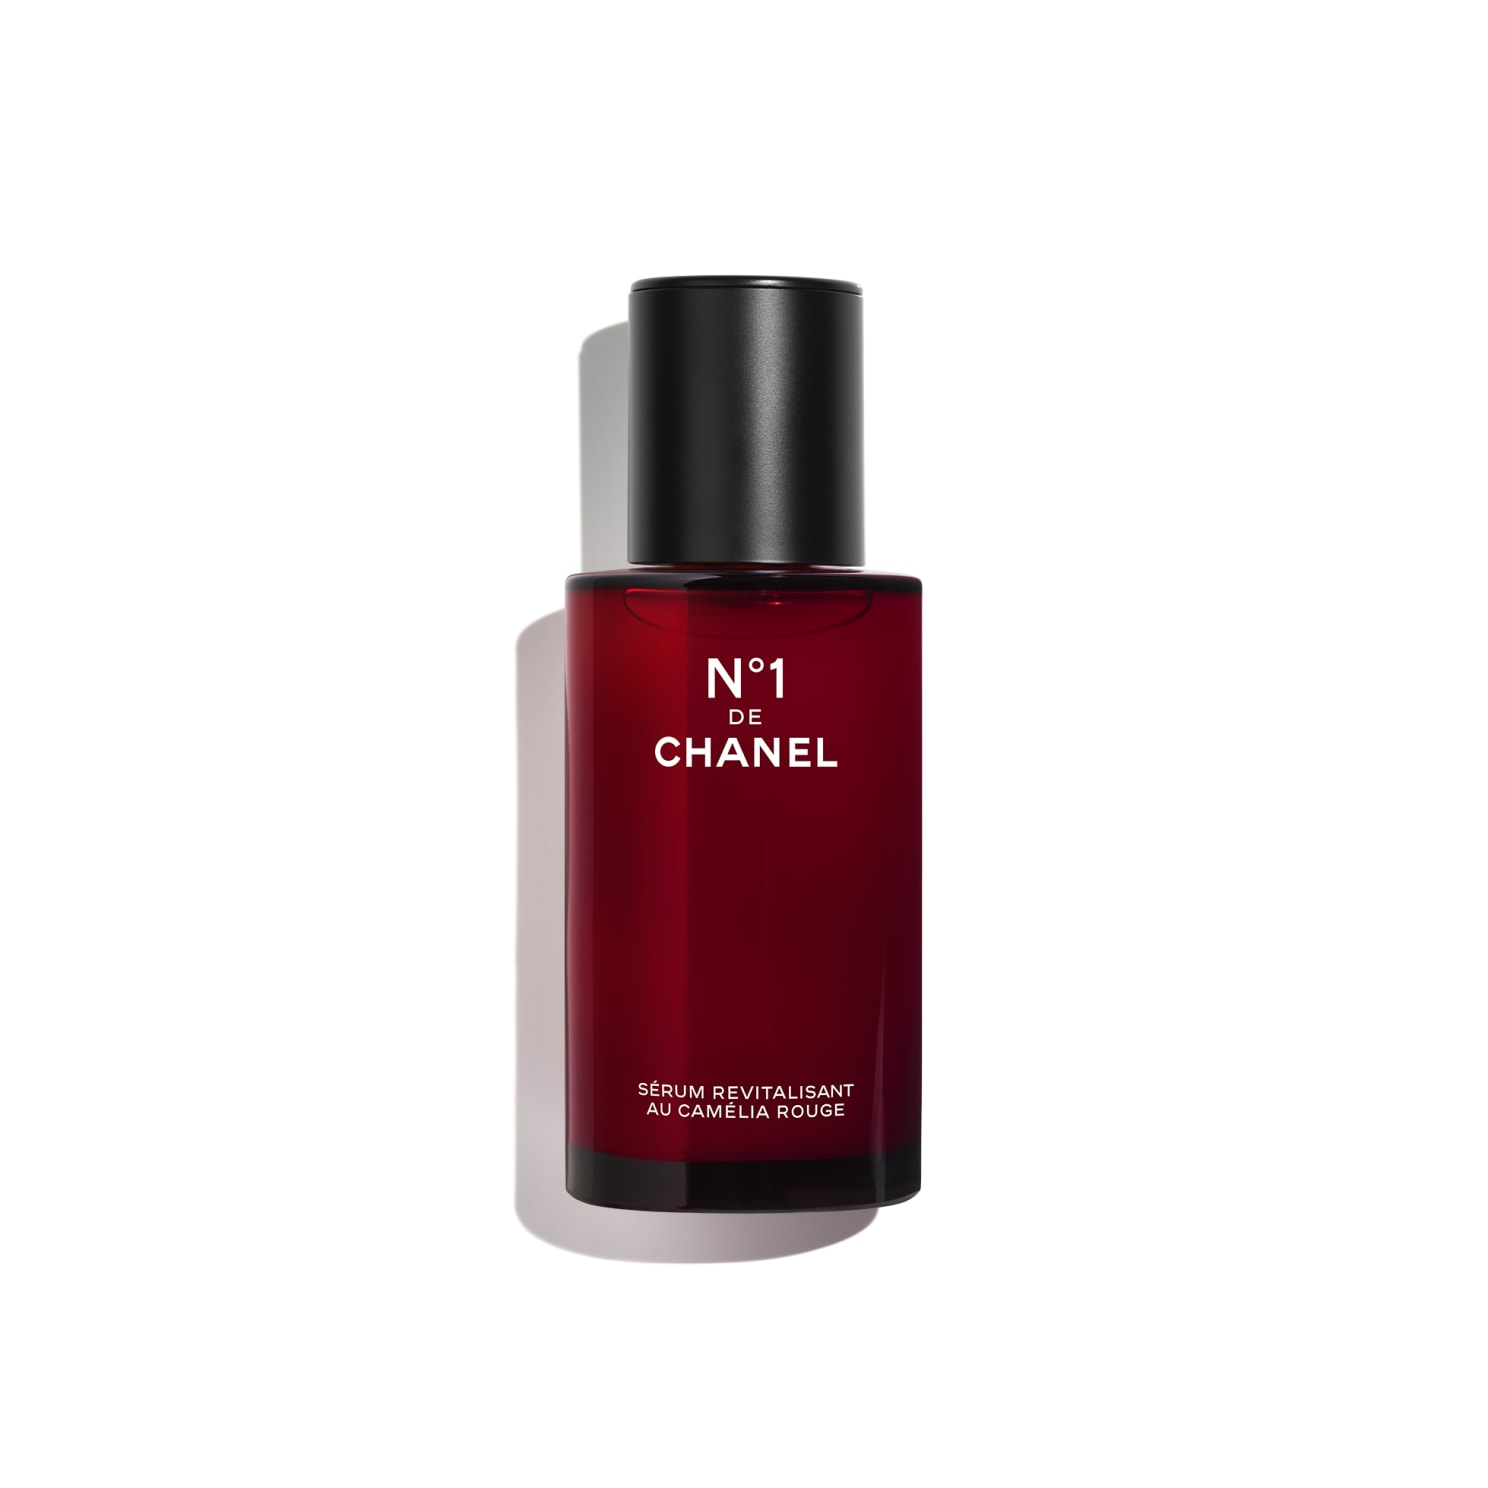 n-1-de-chanel-revitalizing-serum-prevents-and-corrects-the-appearance-of-the-5-signs-of-aging-1-7fl-oz--packshot-default-140885-8847669100574